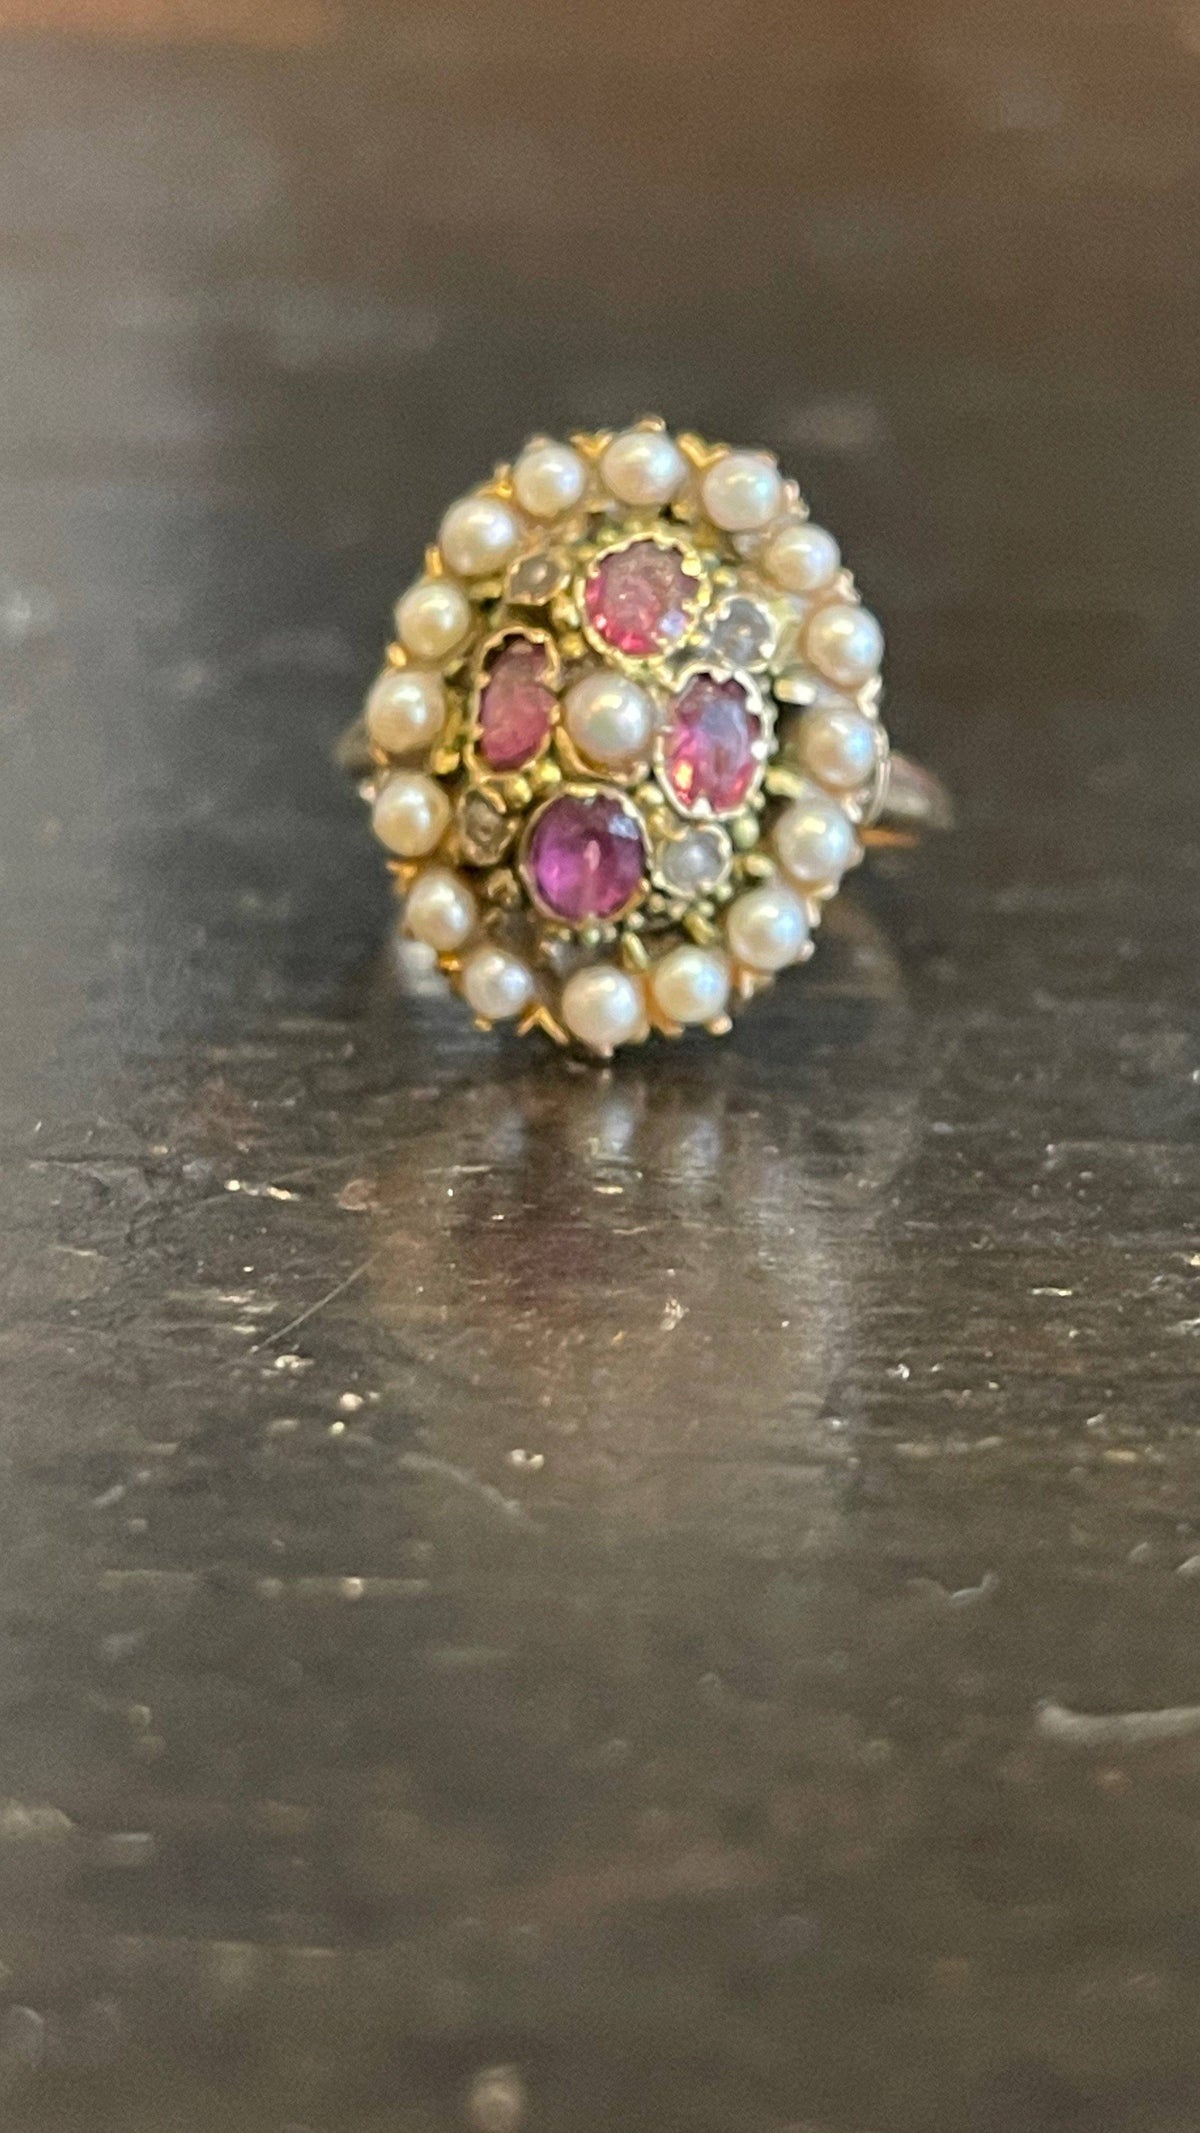 Ring - 19TH CENTURY VICTORIAN GOLD, AMETHYST, &amp; PEARL RING